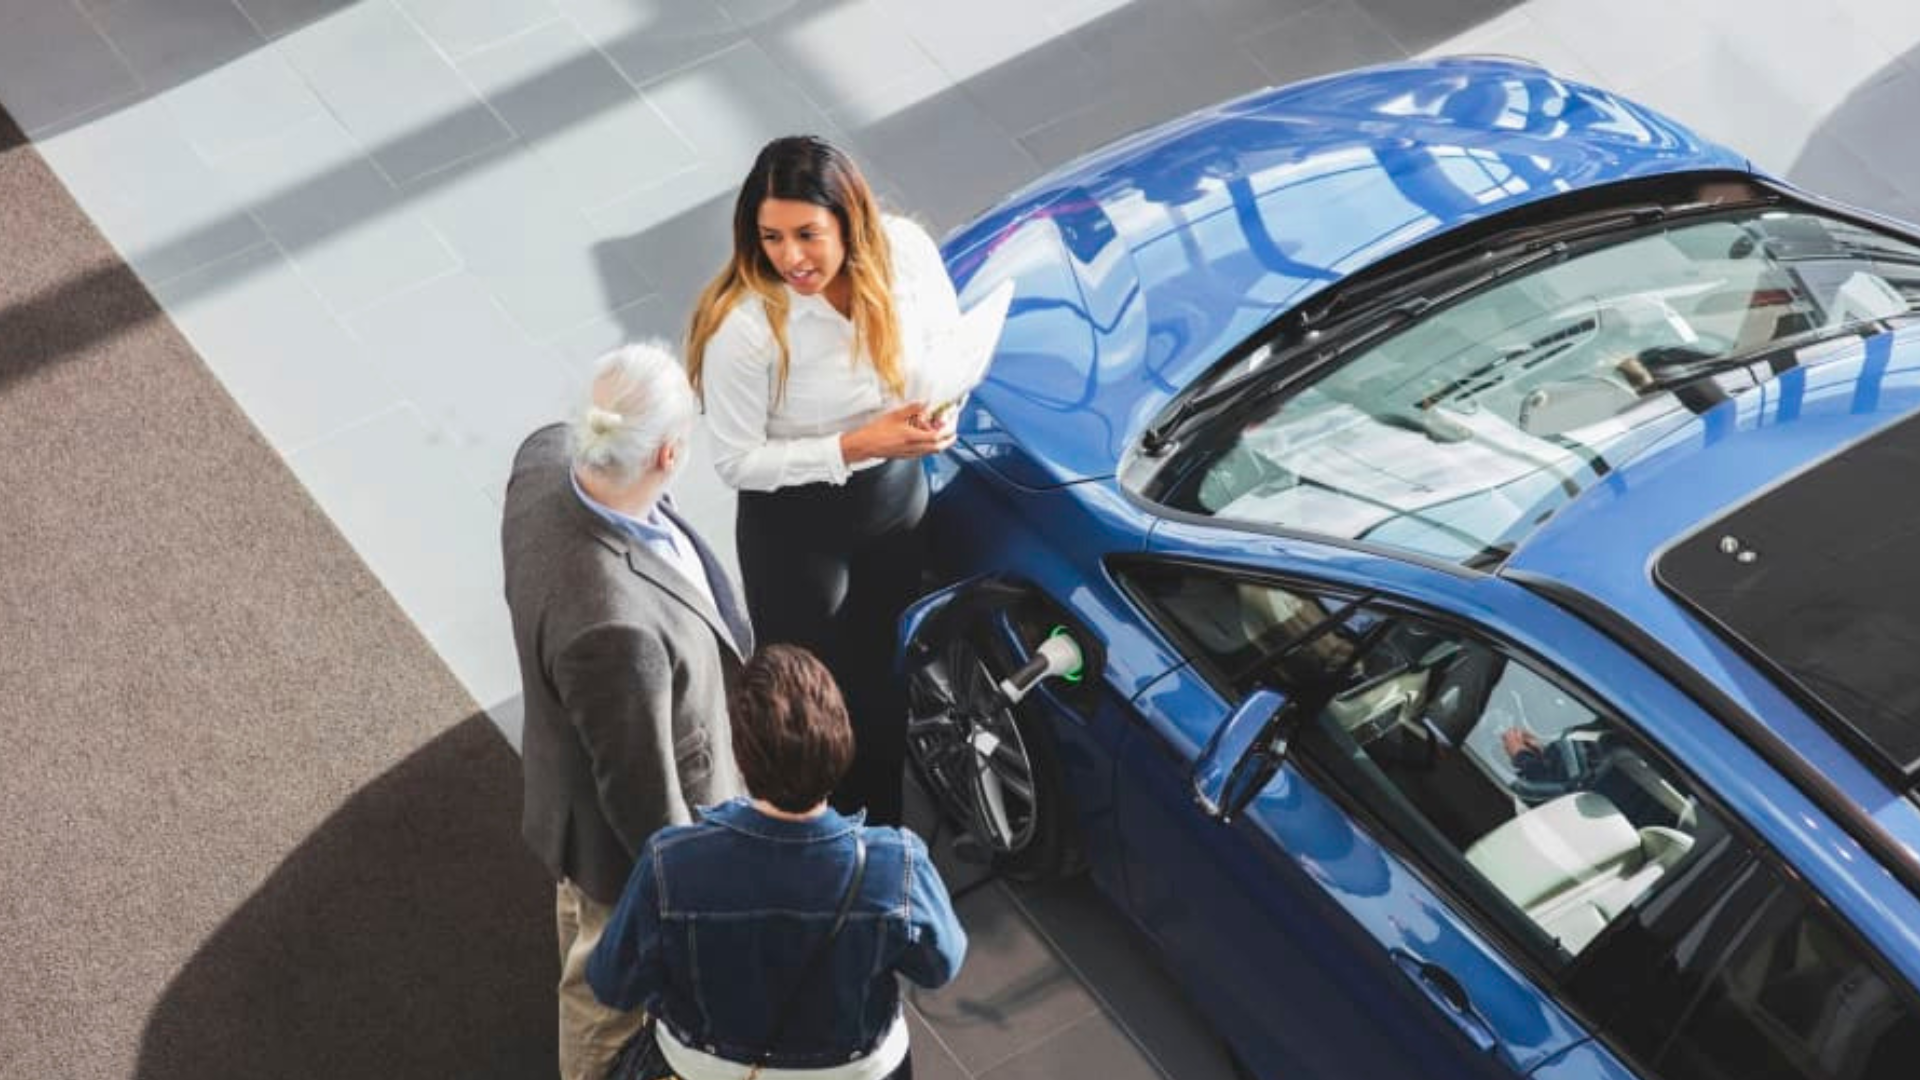 Car Warranties: Are They Worth It?